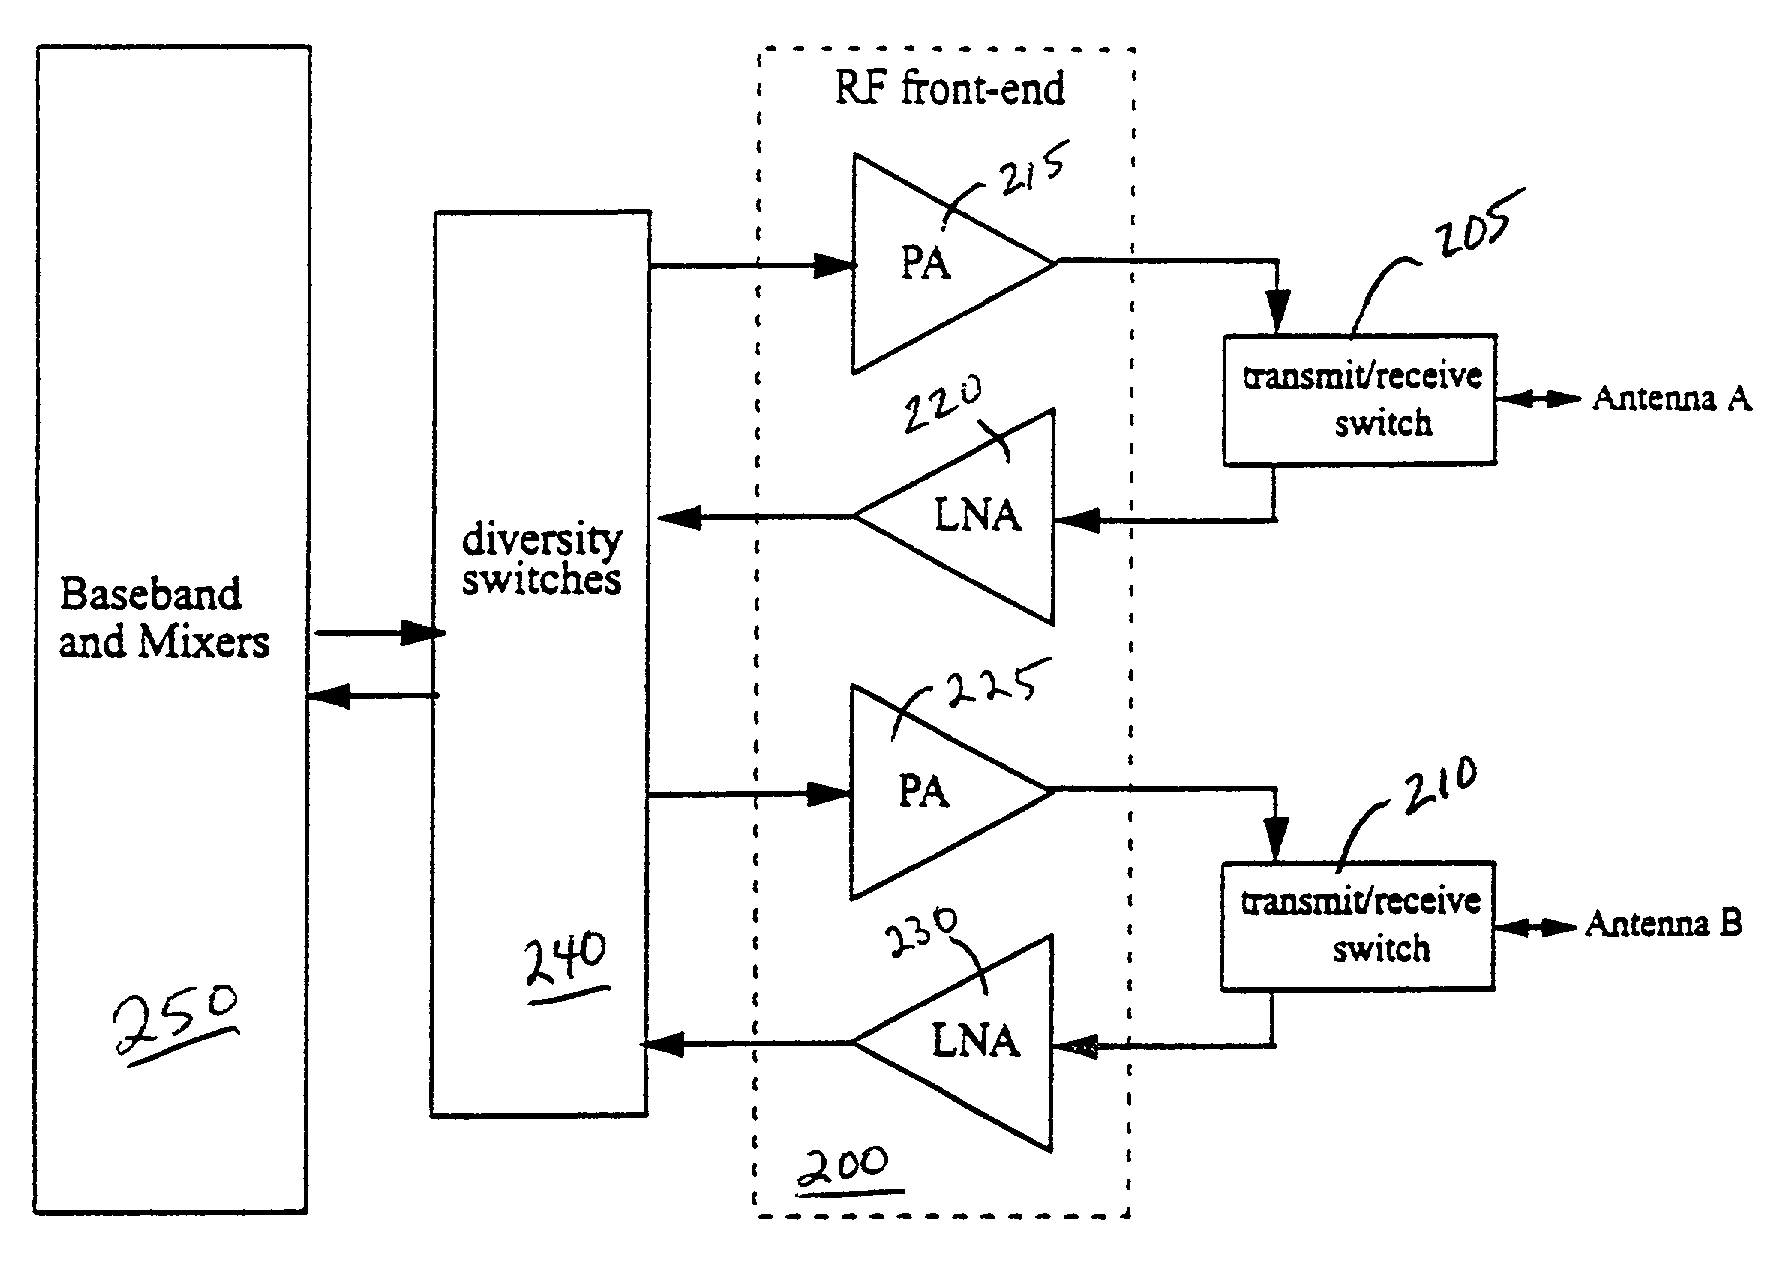 Method and apparatus for signal power loss reduction in RF communication systems